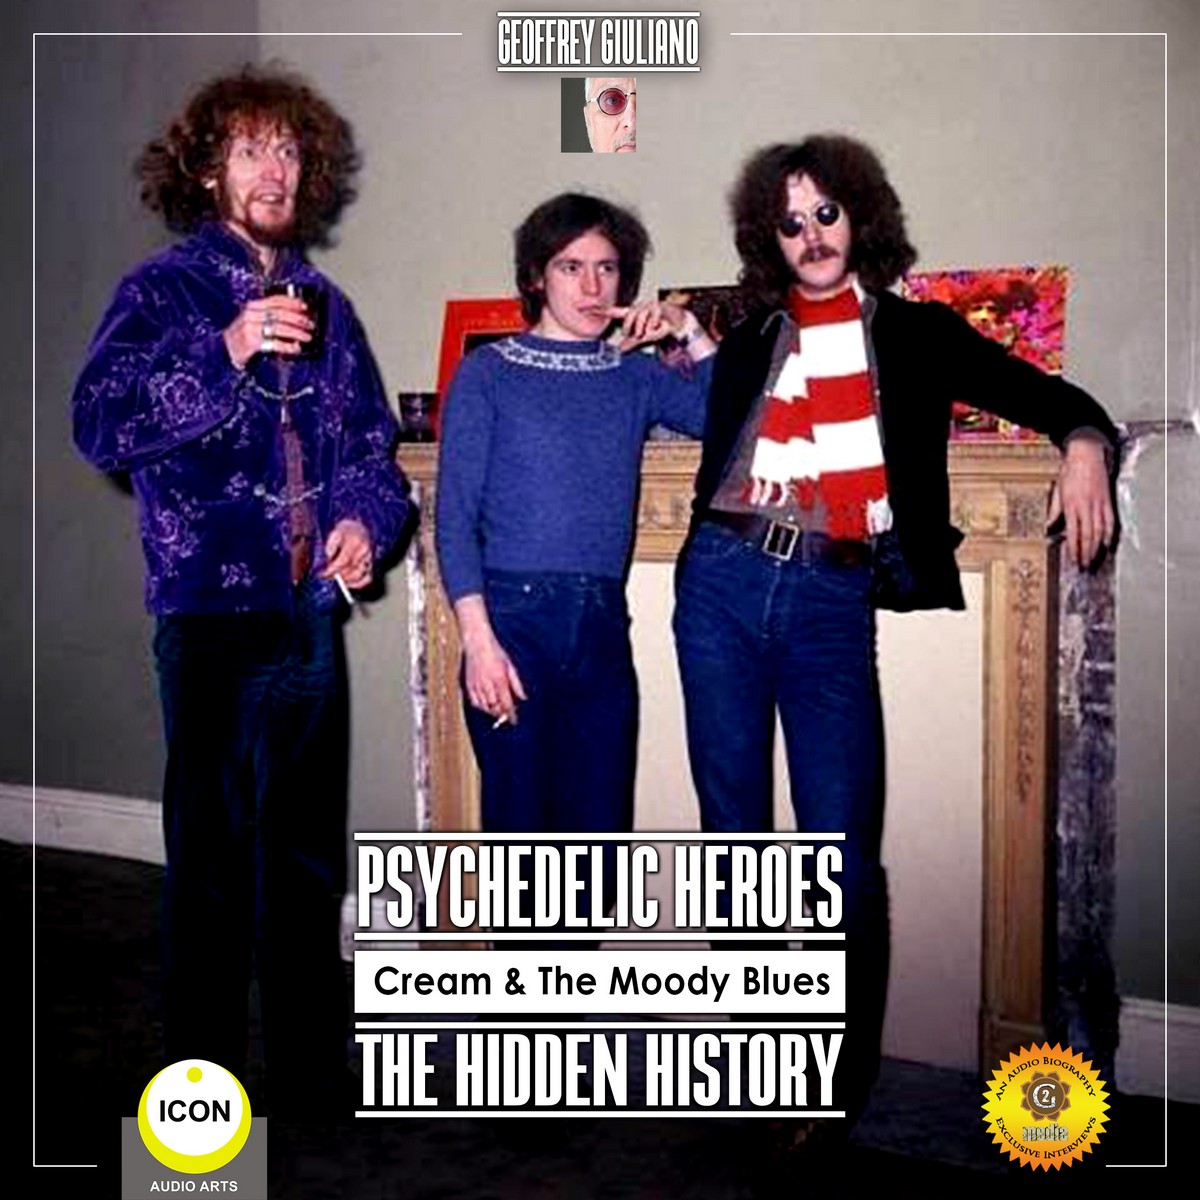 Psychedelic Heroes Cream & the Moody Blues – The Hidden History